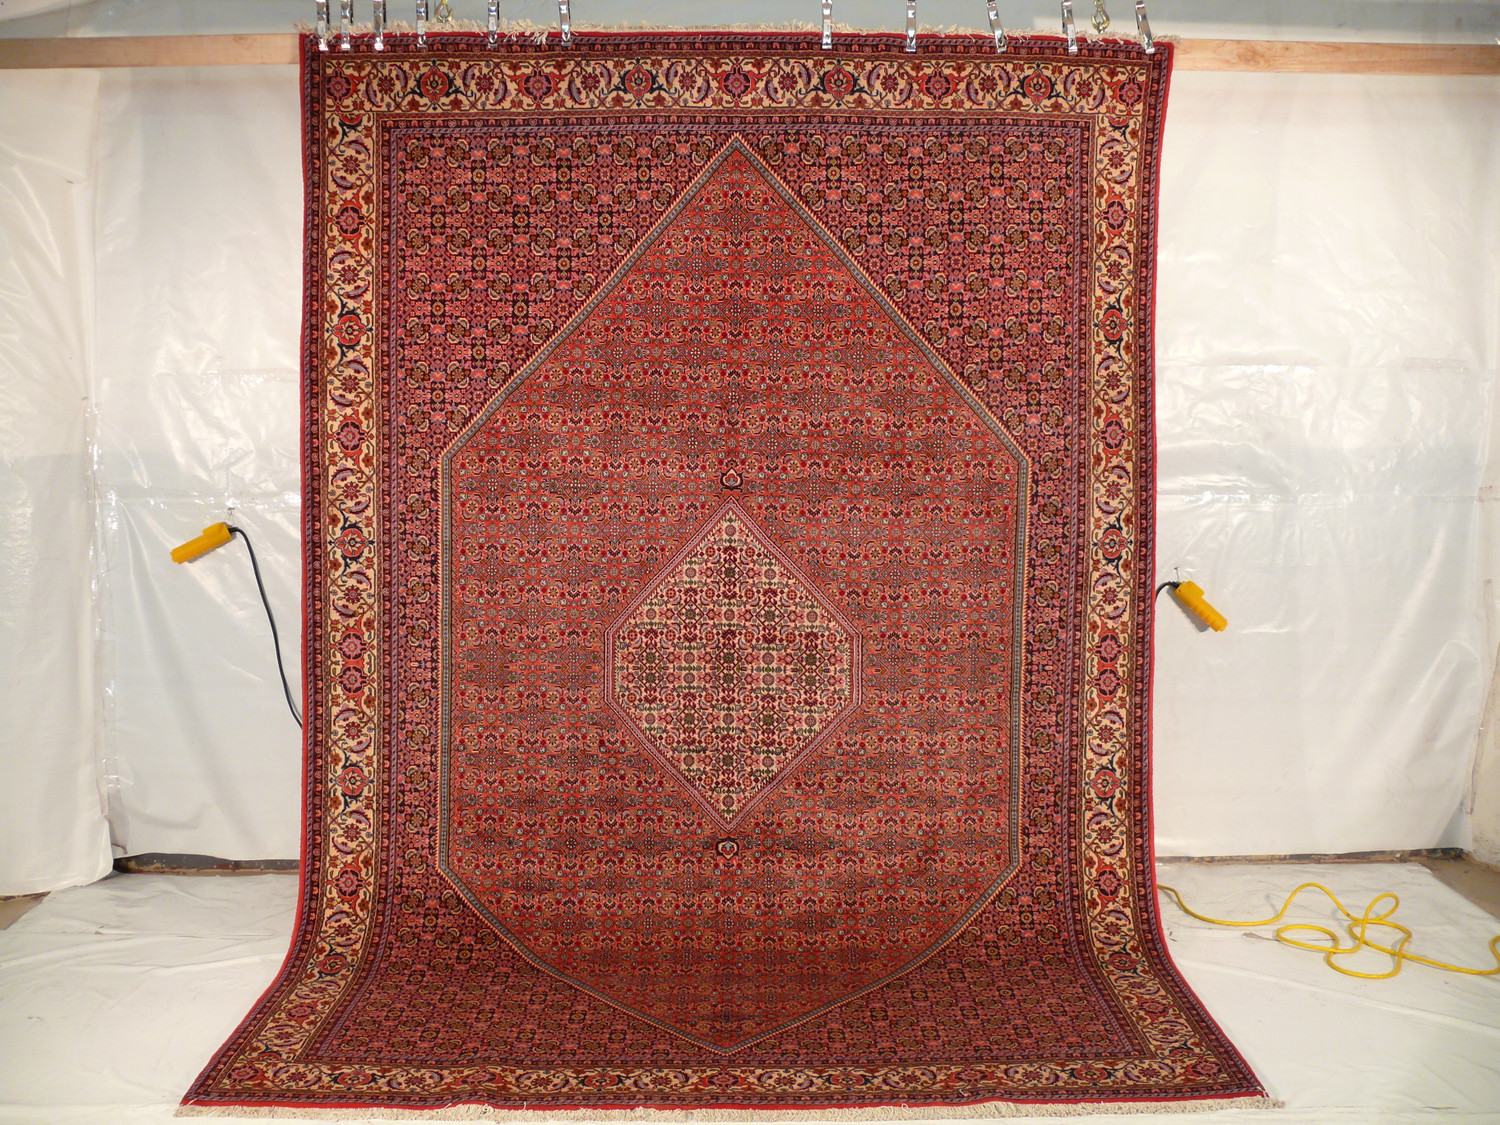 The Persian Bijar Iron Rug is shown hanging vertically, revealing its full splendor and the gravity-defying thickness of its weave, with its patterns cascading down its length, surrounded by a makeshift white backdrop and yellow measuring tape on the floor.